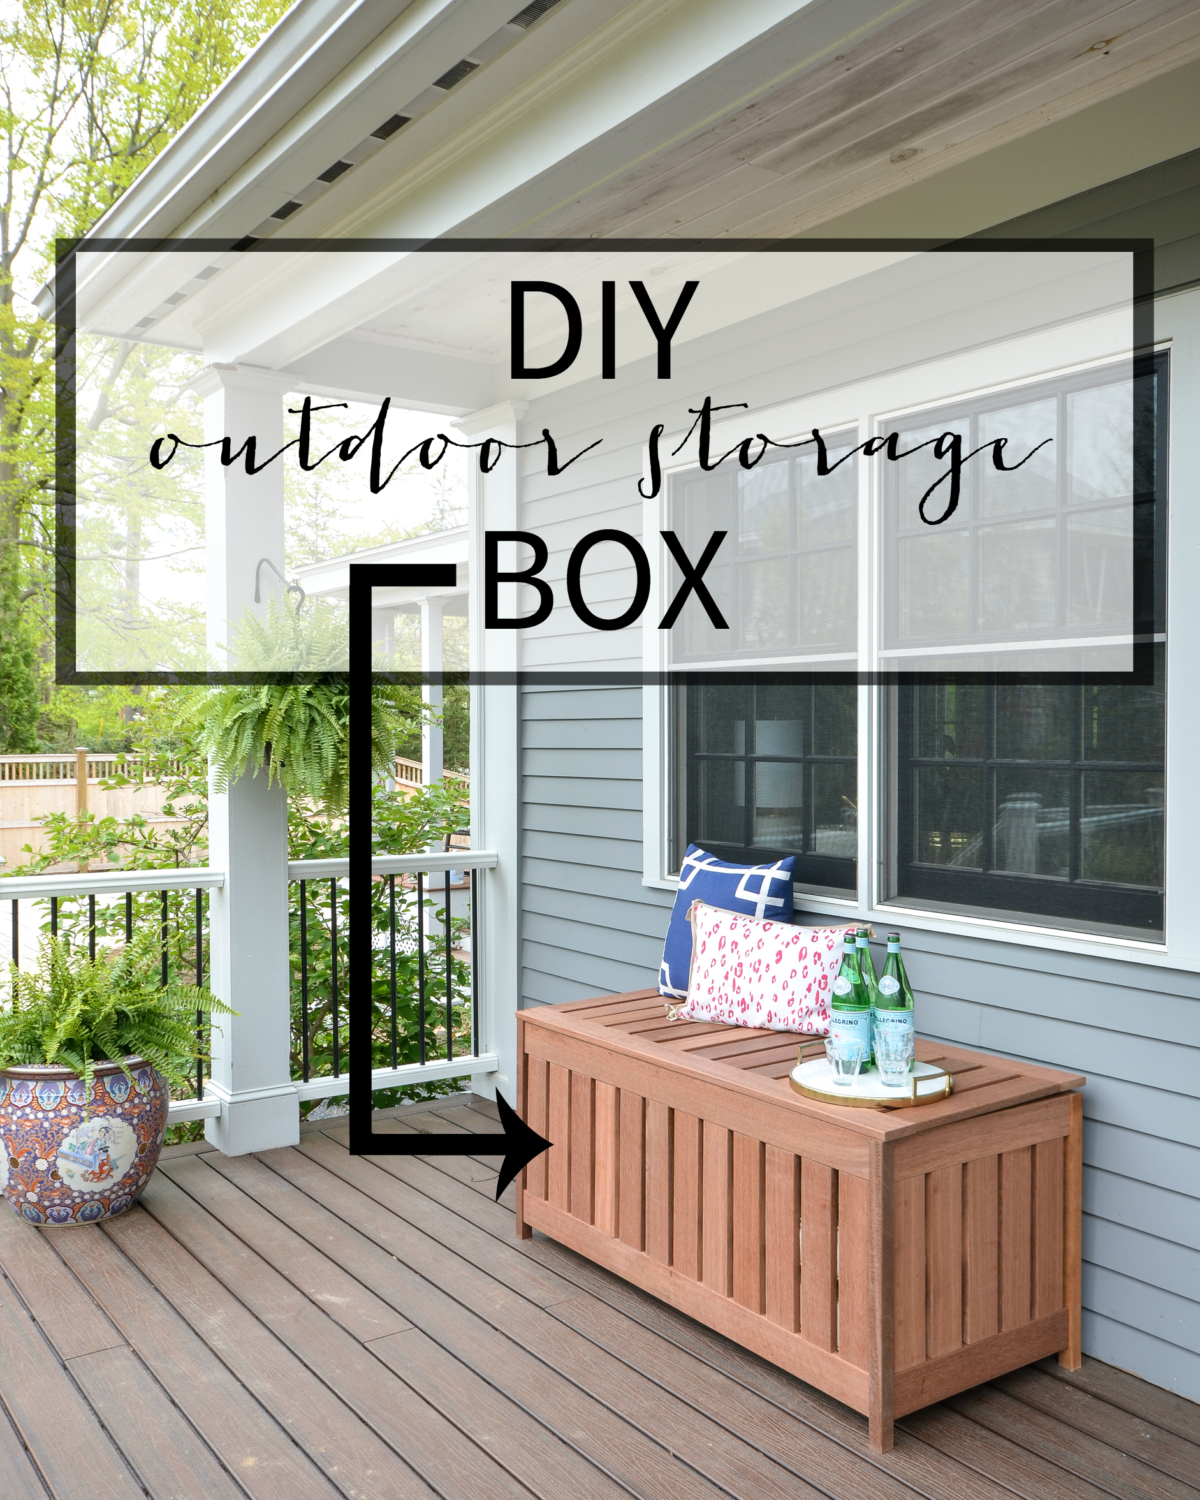 Build a Deck Box for Outdoor Storage